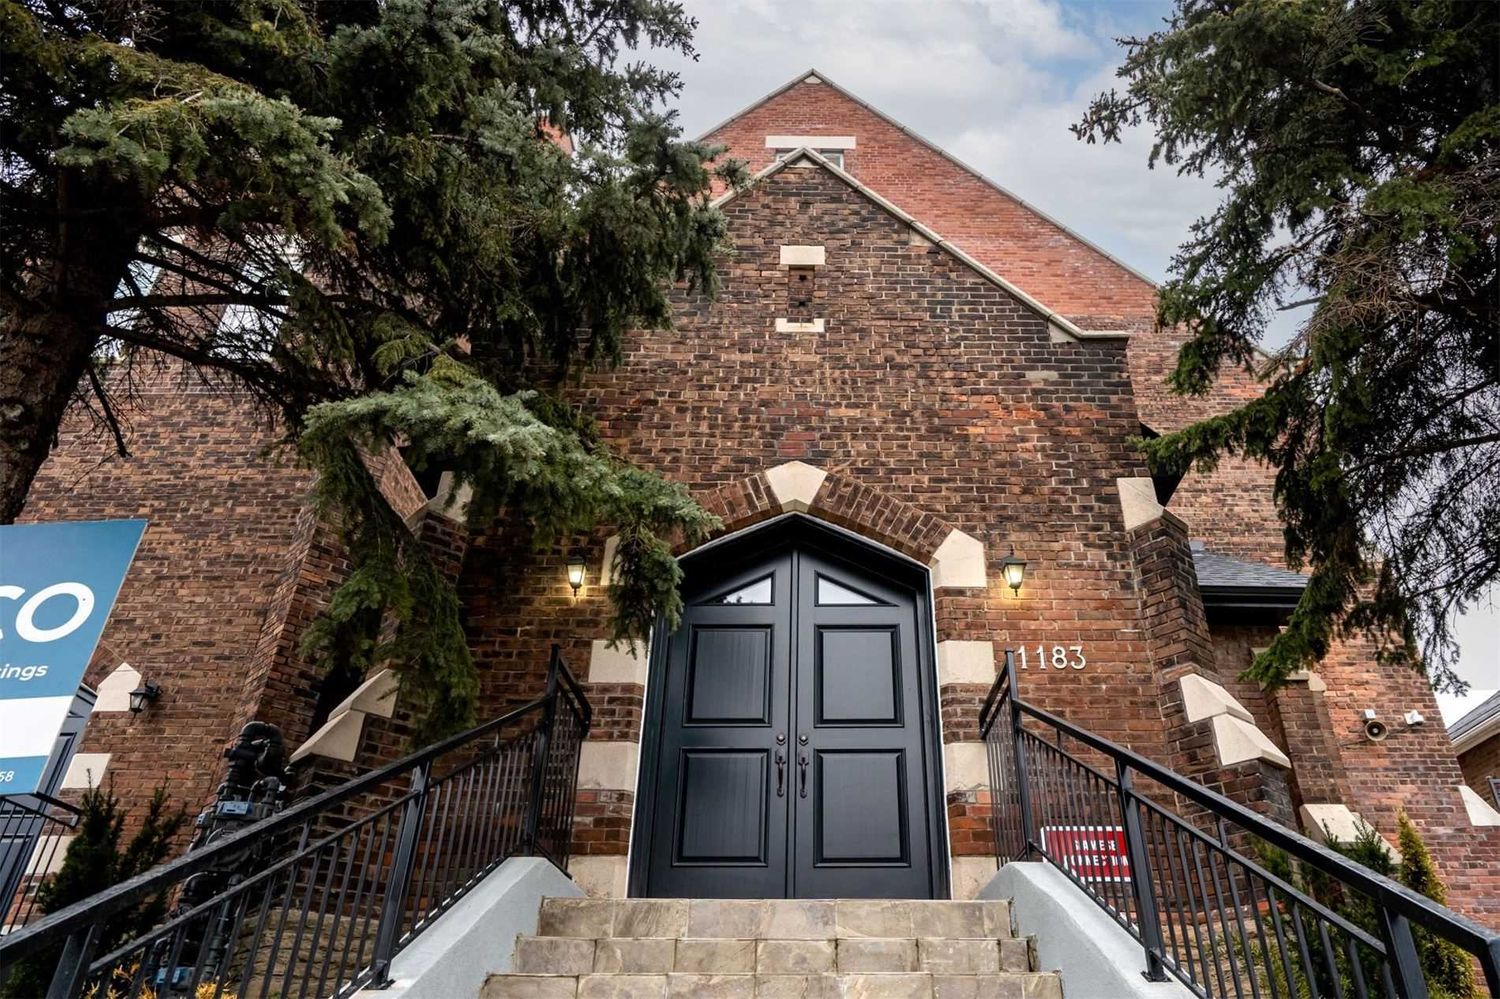 1183 Dufferin Street. Urban Church Lofts is located in  West End, Toronto - image #2 of 2